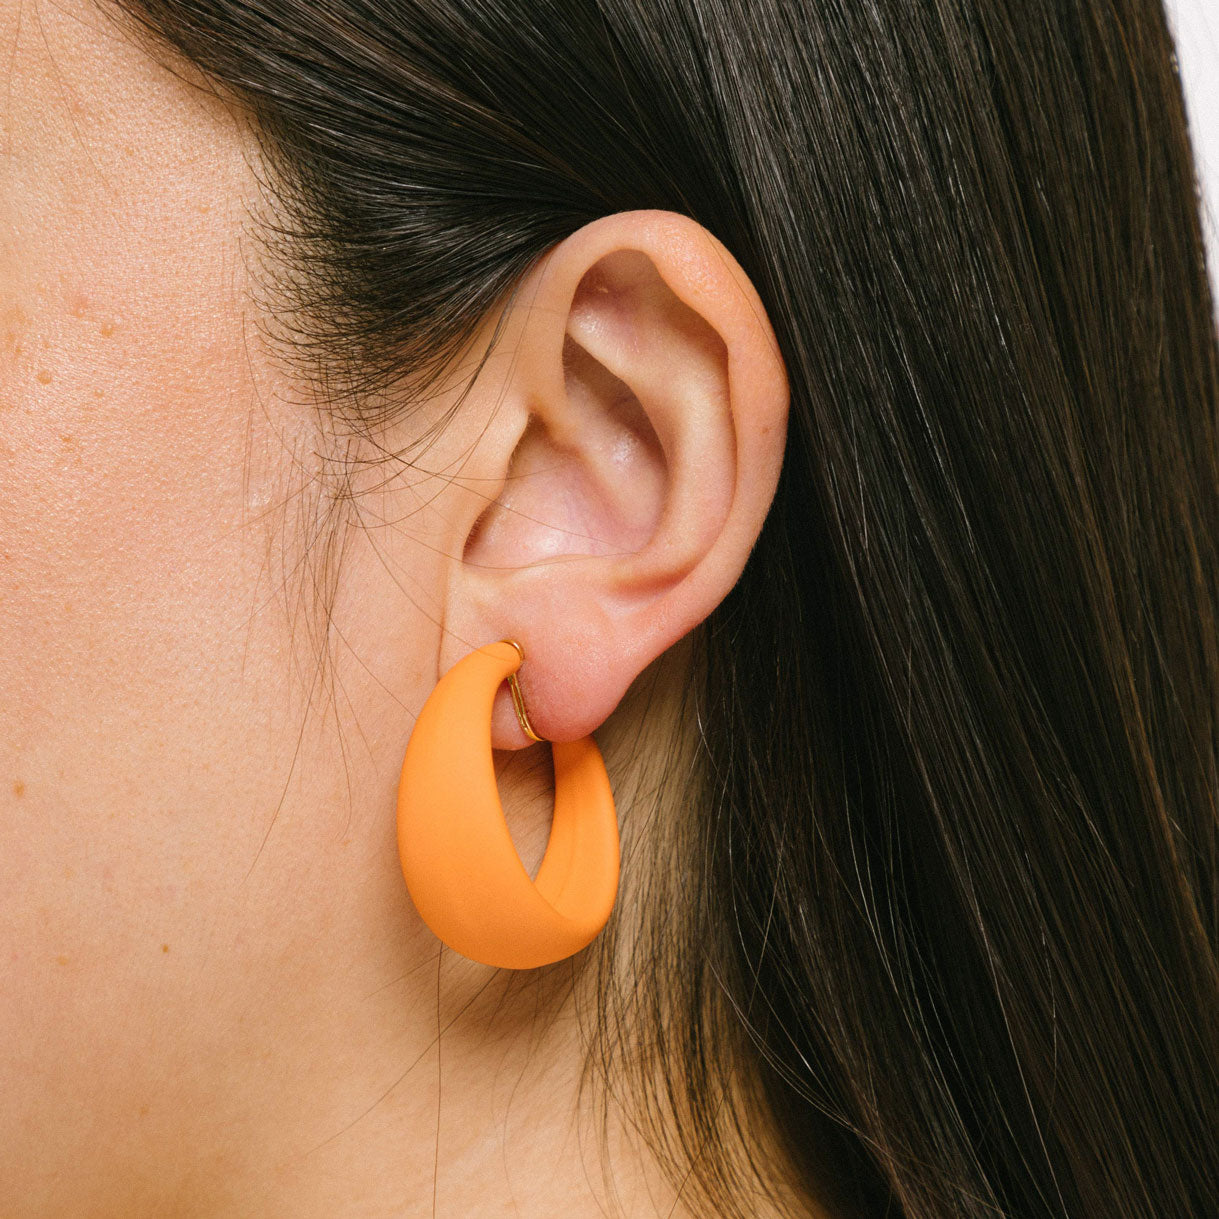 Eye-catching orange clip-on earrings with screwback closure, suitable for all ear types - thick, sensitive, small, and stretched/healing ears. Provides a secure hold and can be manually adjusted. 